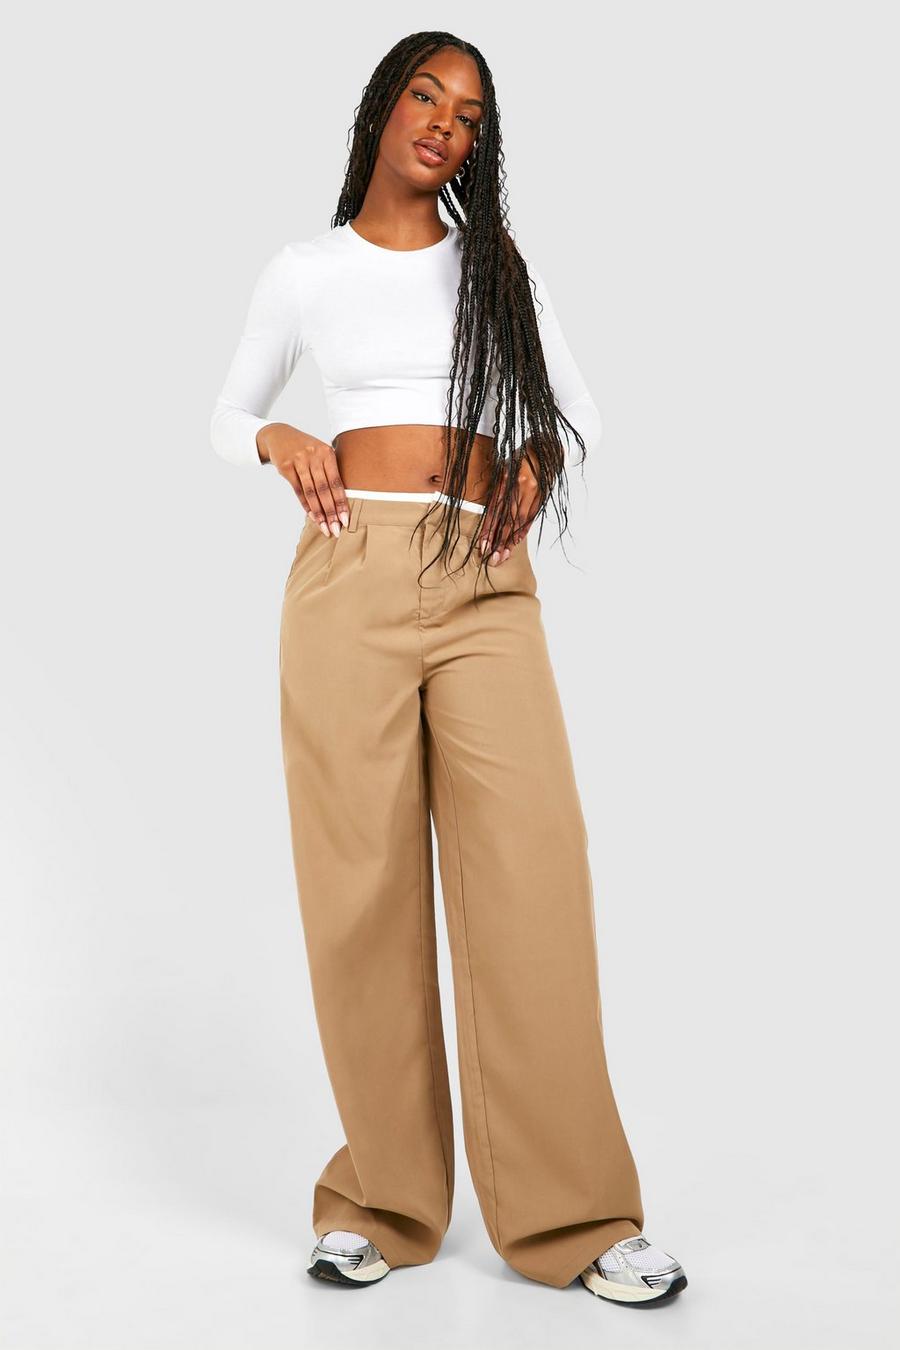 Mocha Tall Woven Elastic Waist Band Detail Pleated Pants image number 1